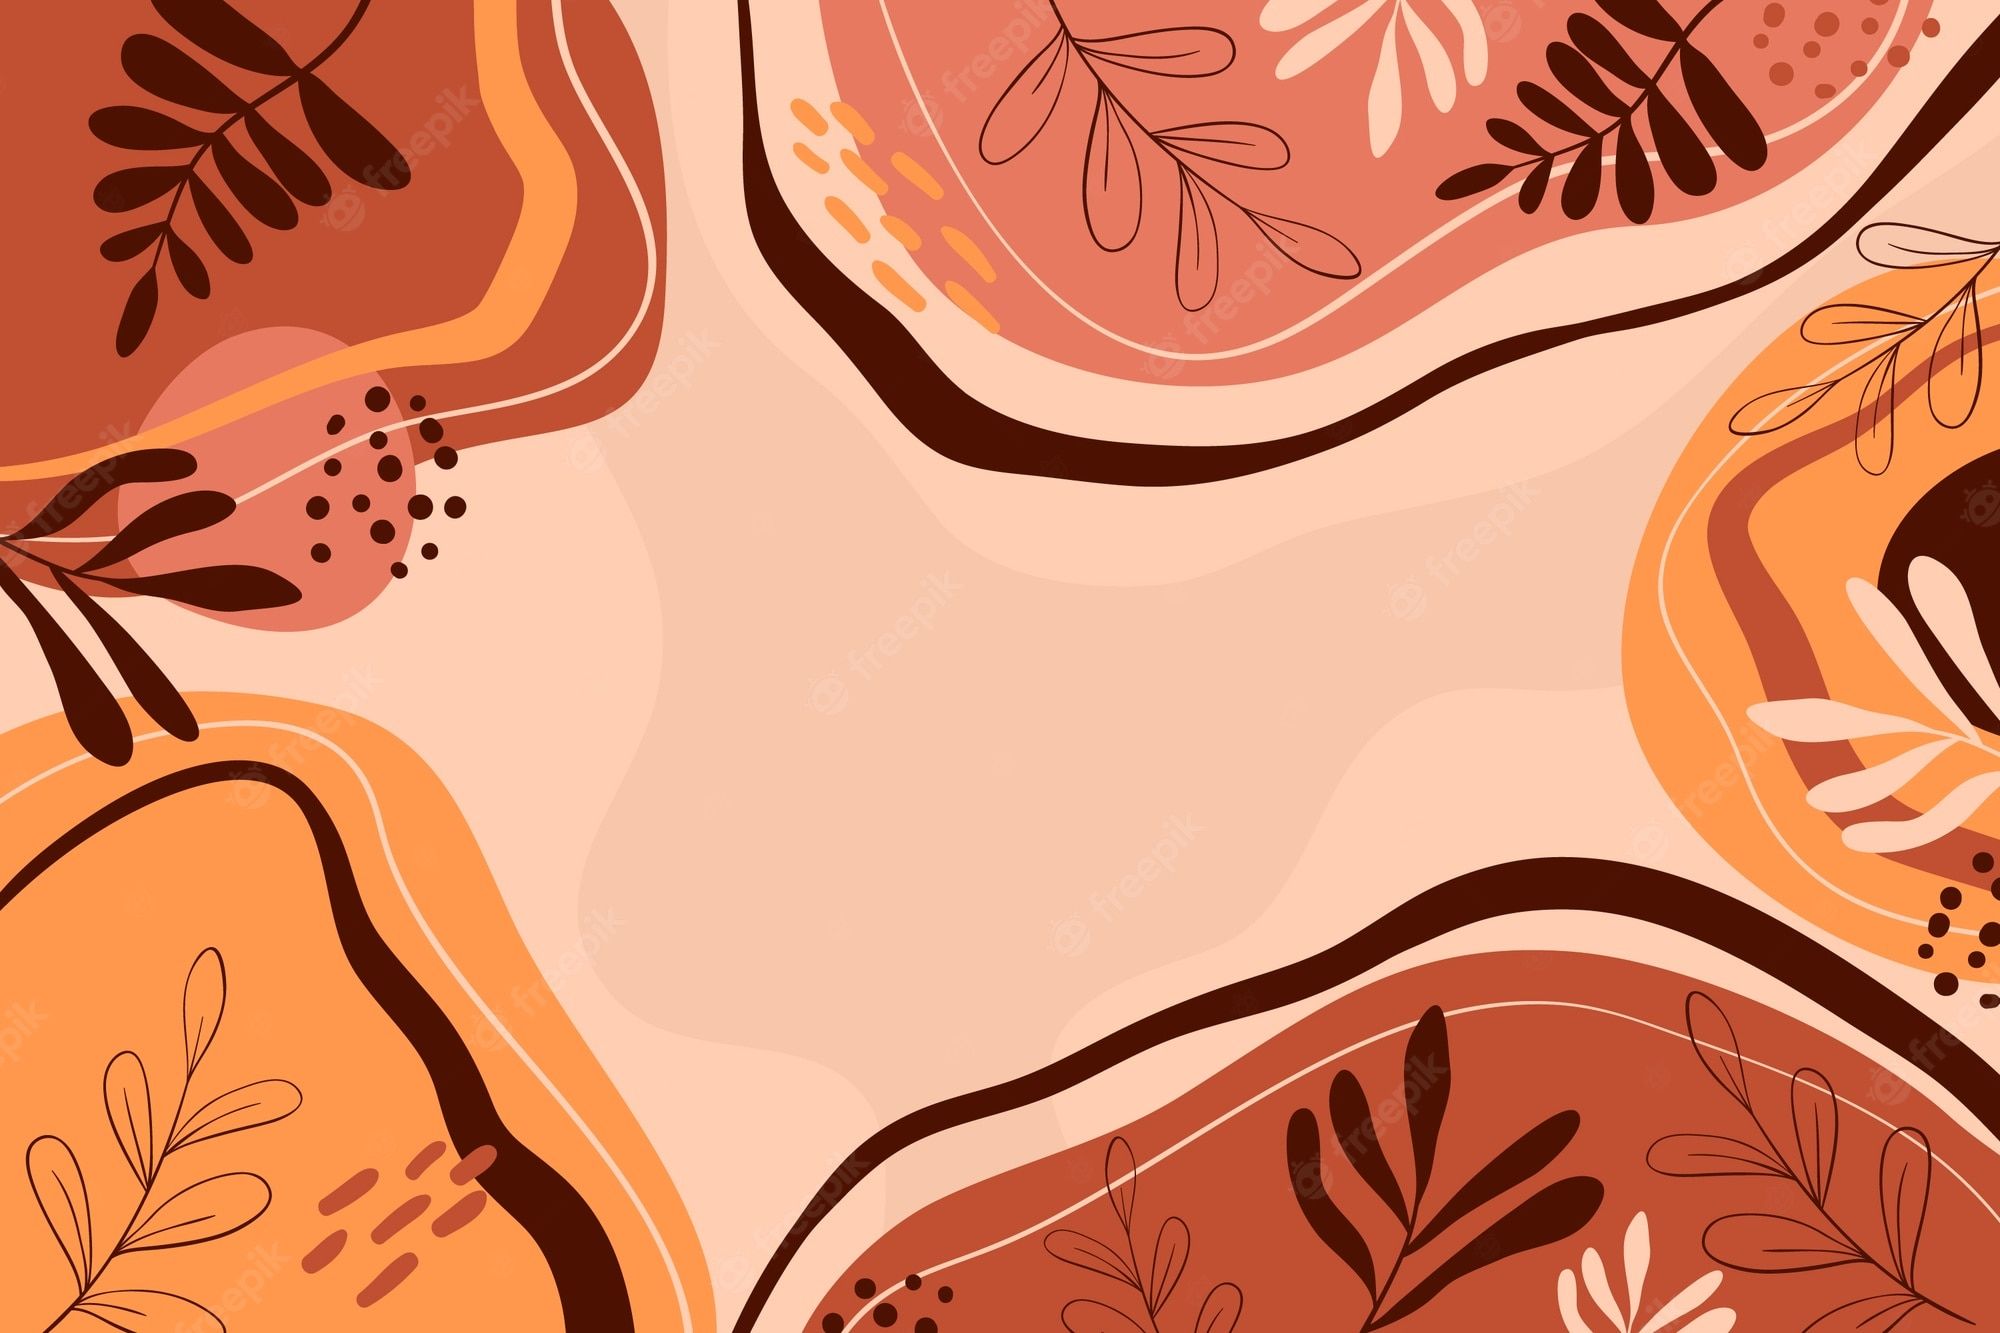 Abstract background with leaves and flowers - Terracotta